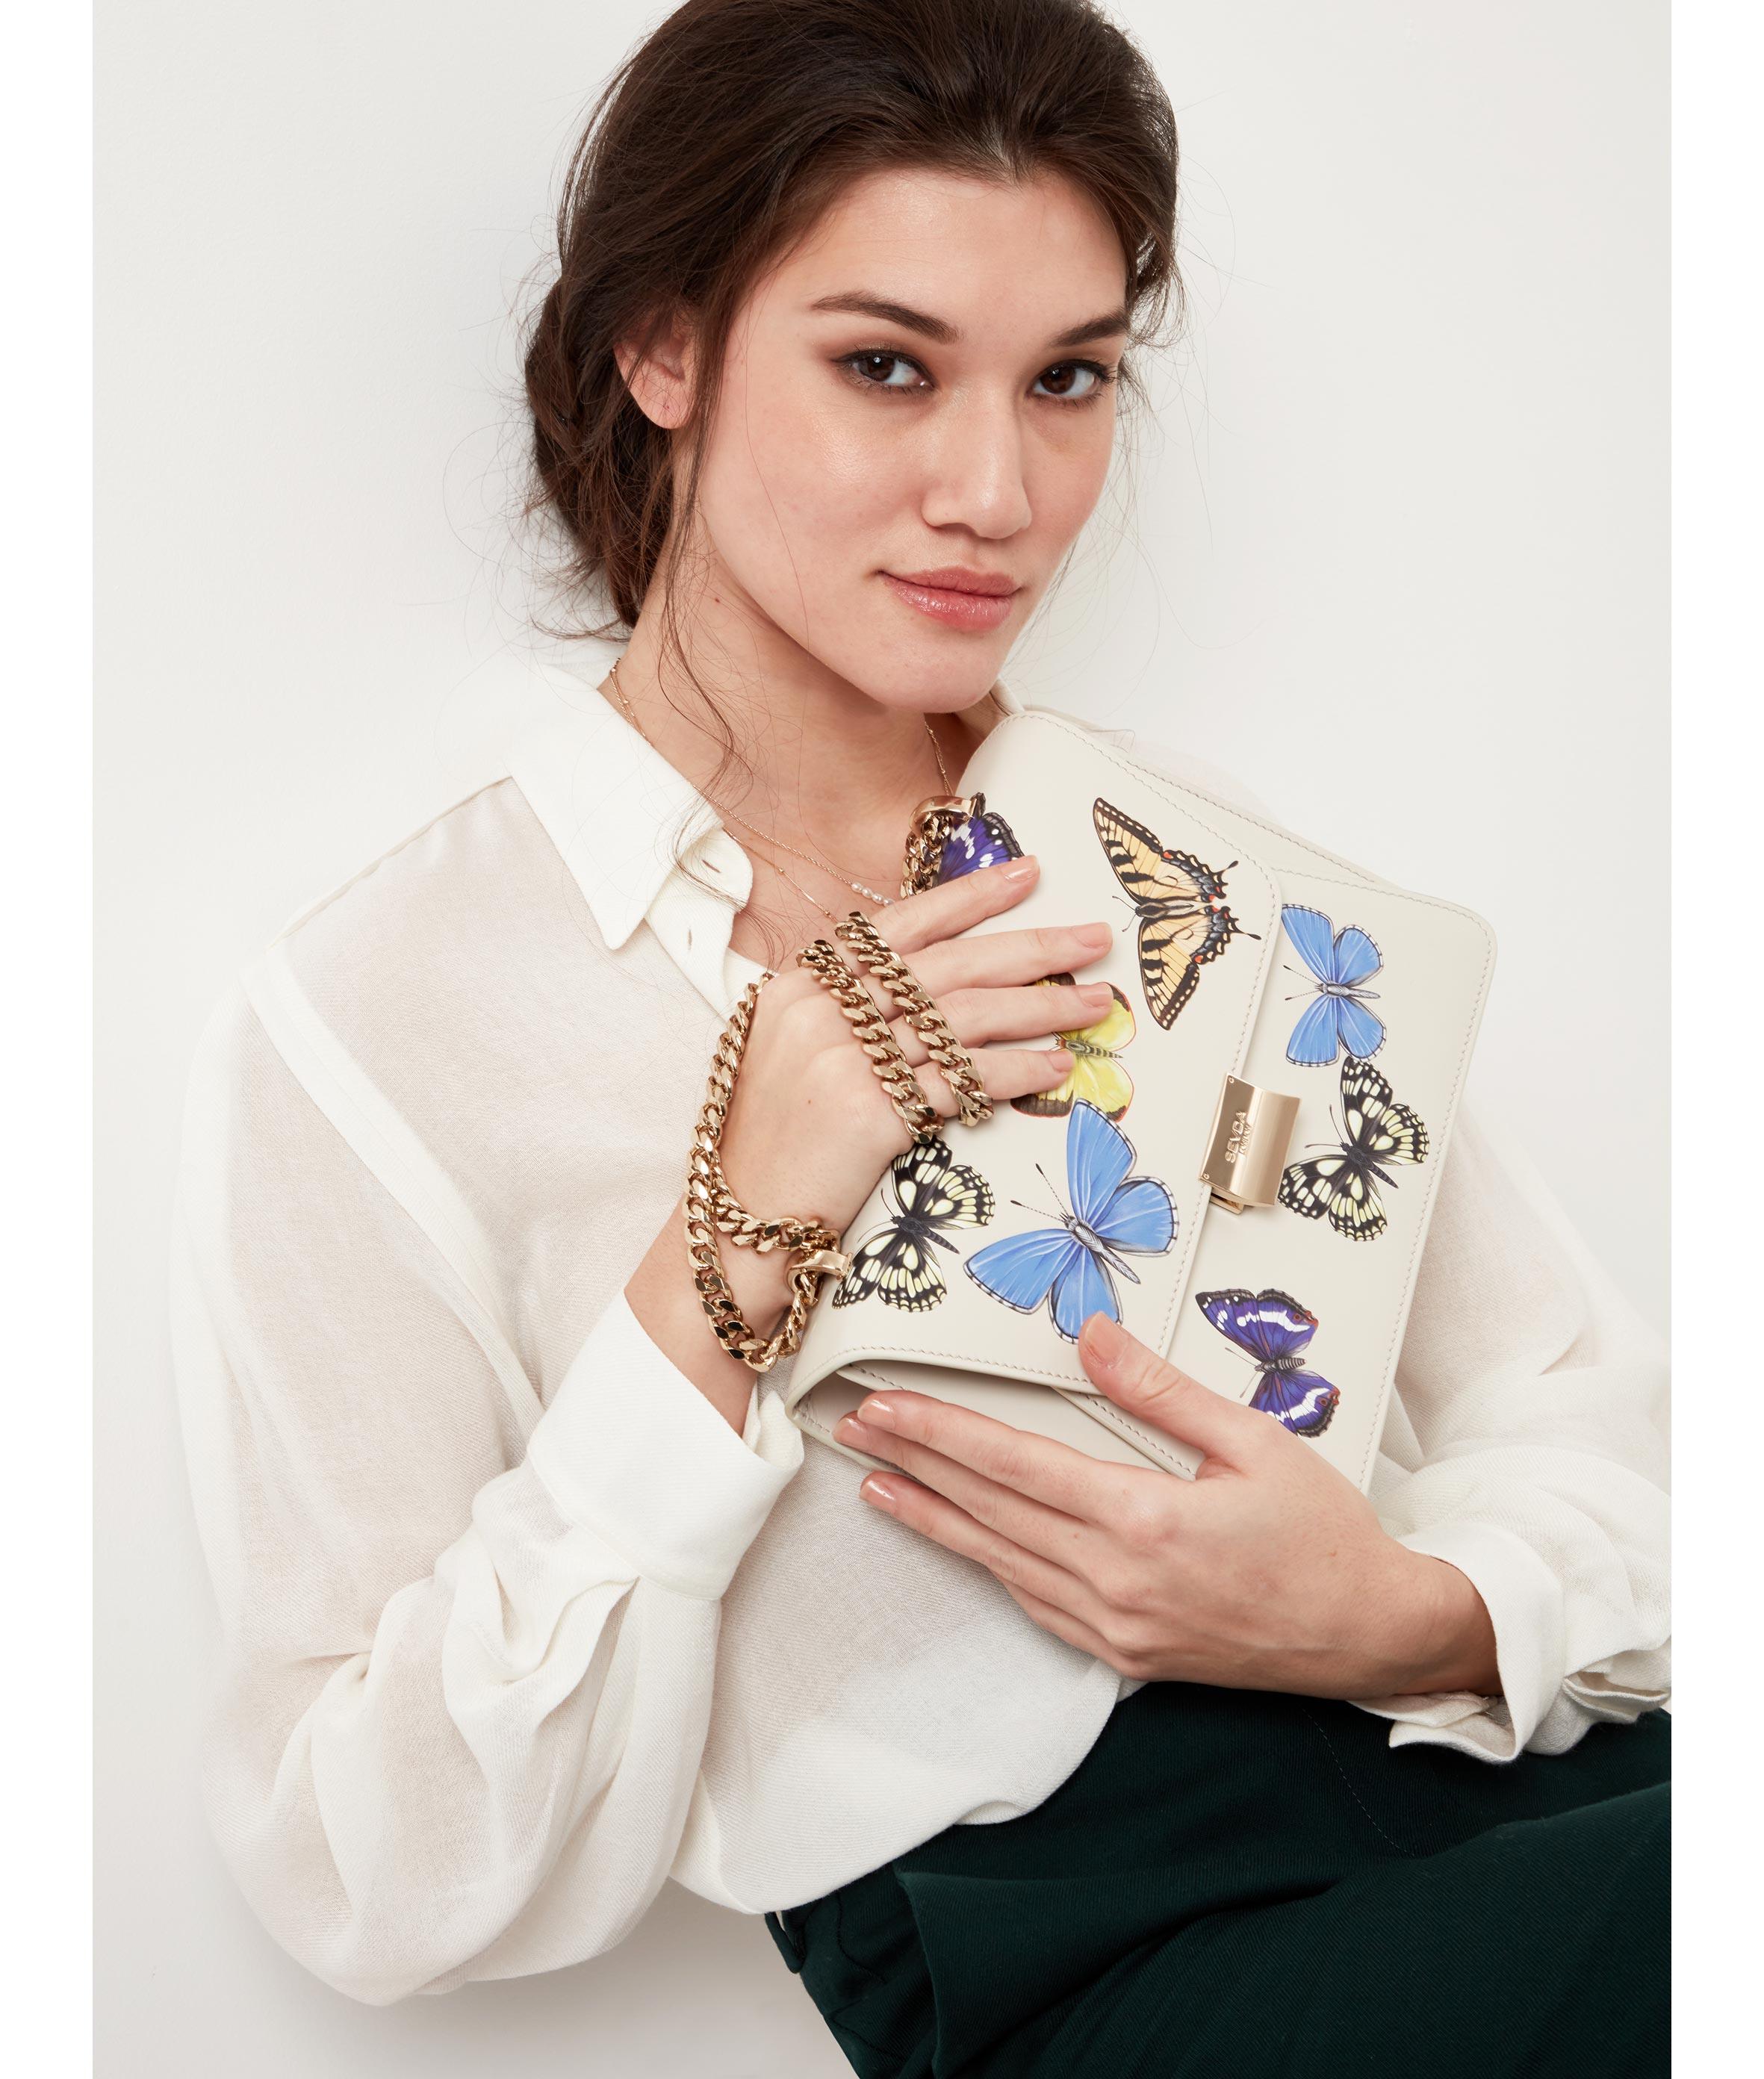 Off White Butterfly Designer Shoulder Bag with Gold Chain - A fusion of London's flair and Italian craftsmanship.